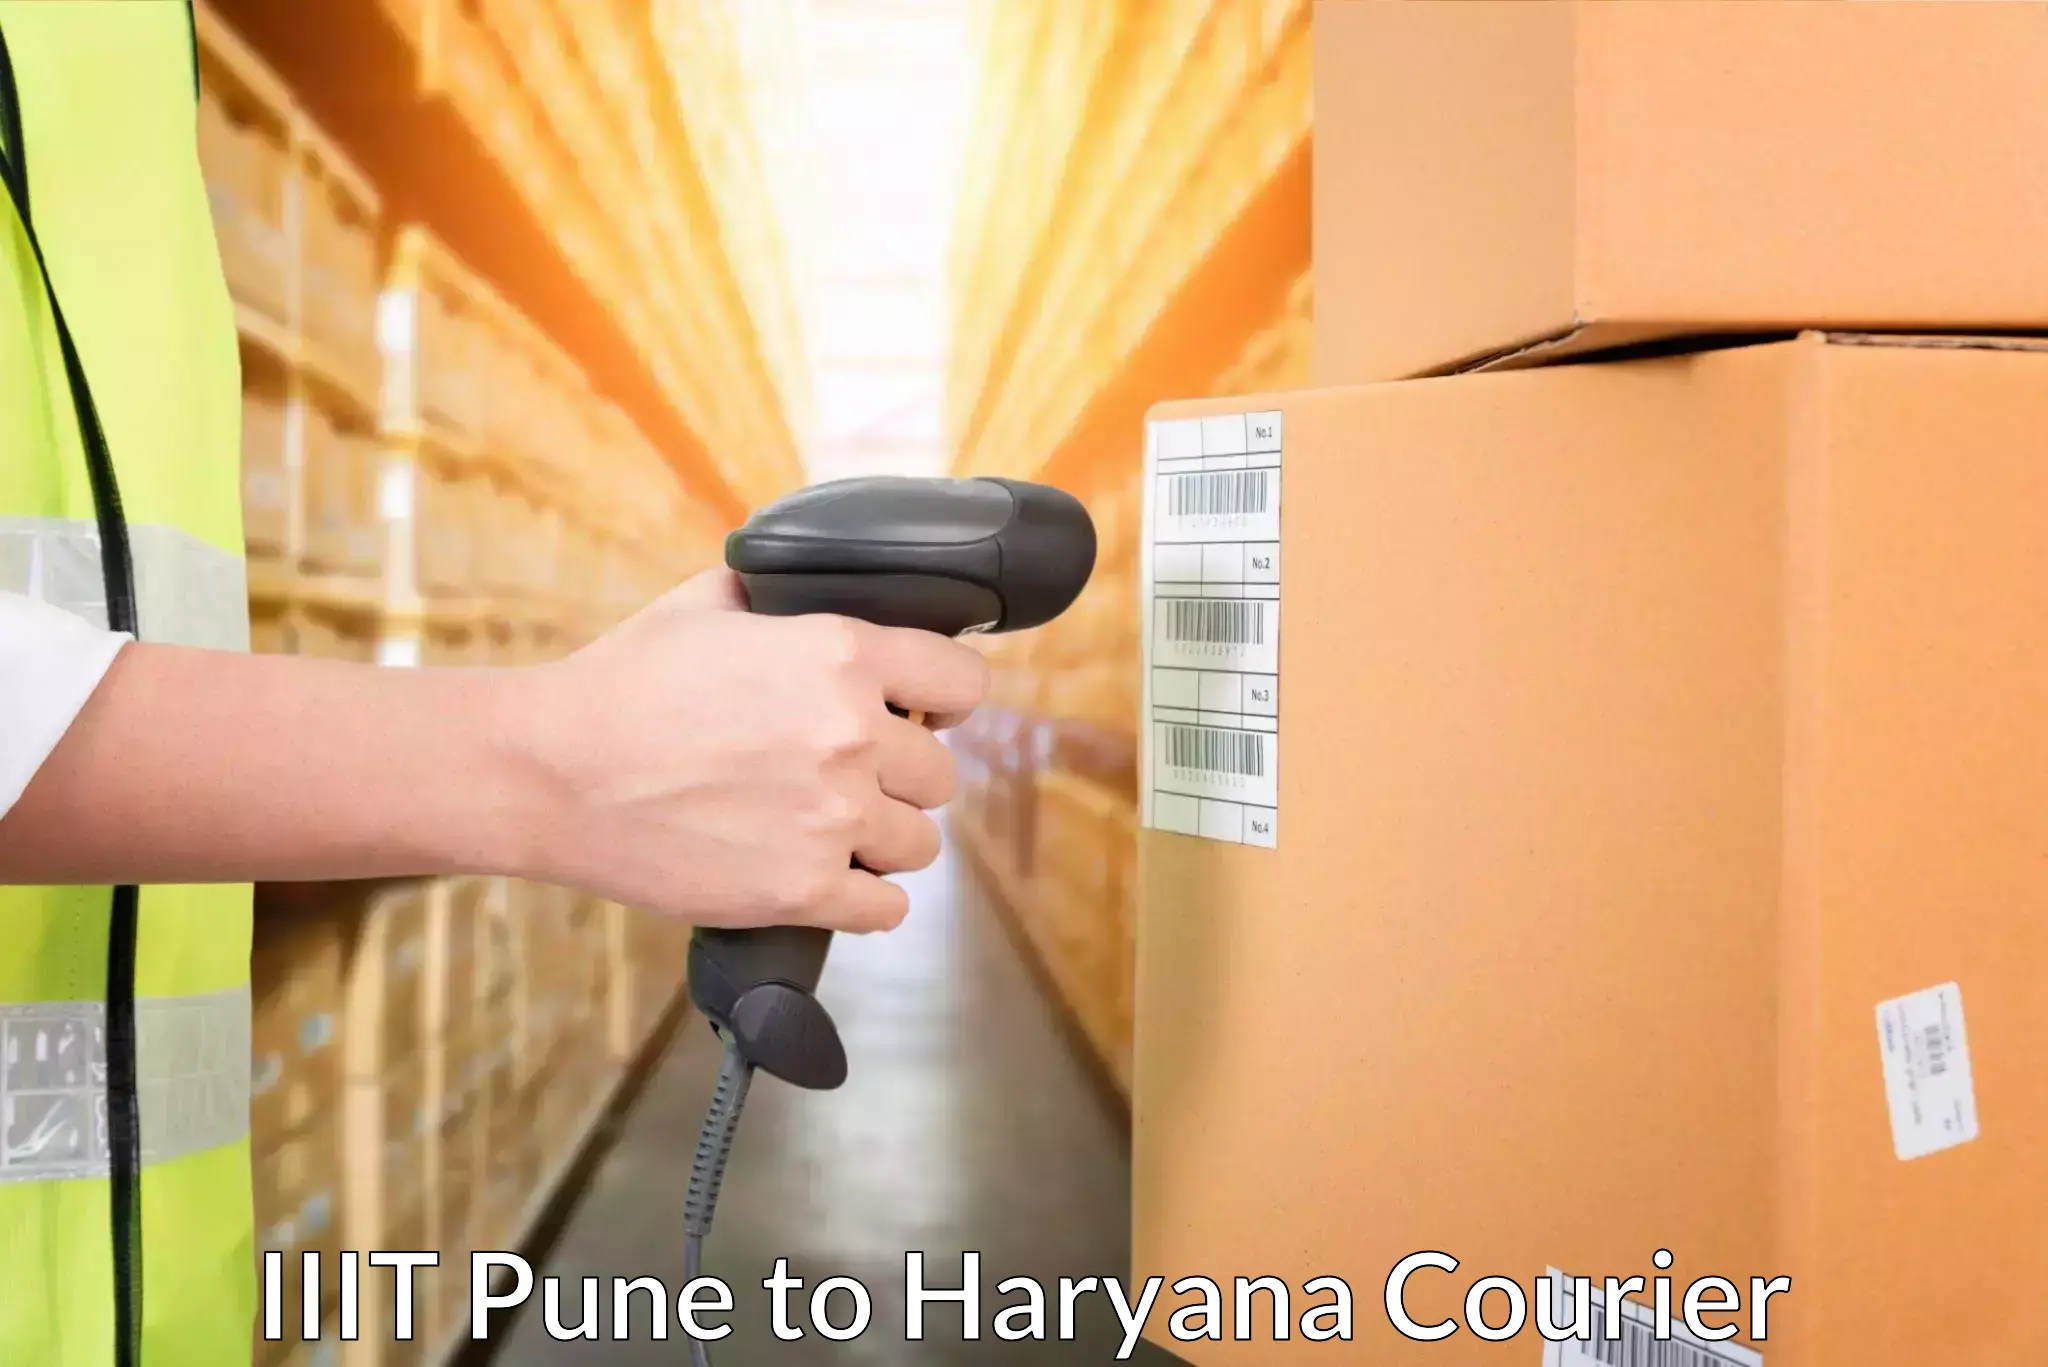 Supply chain delivery IIIT Pune to Sonipat